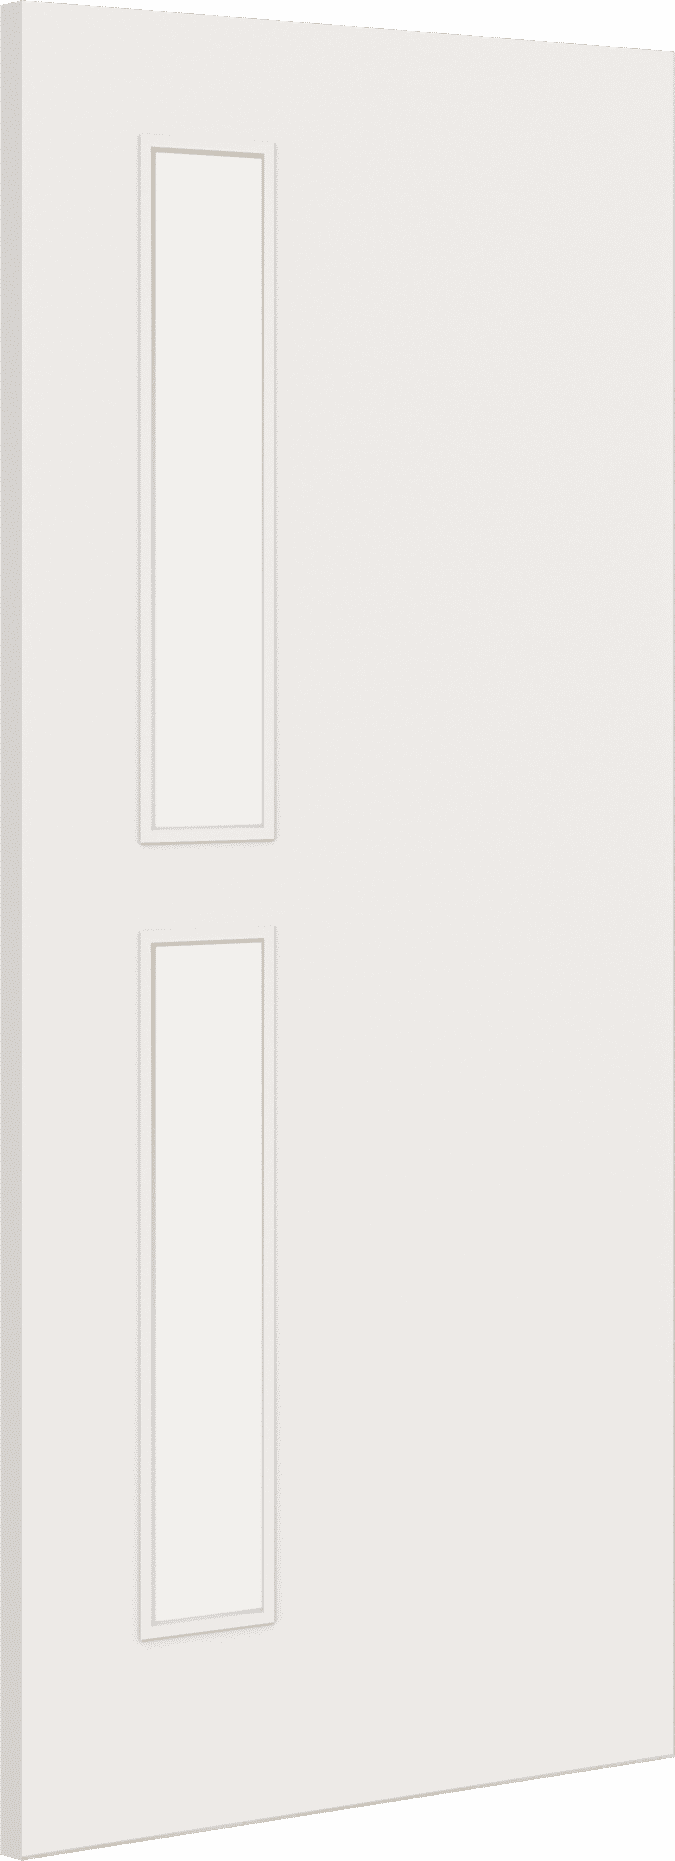 2040mm x 926mm x 44mm Architectural Paint Grade White 07 Clear Glazed Fire Door Blank